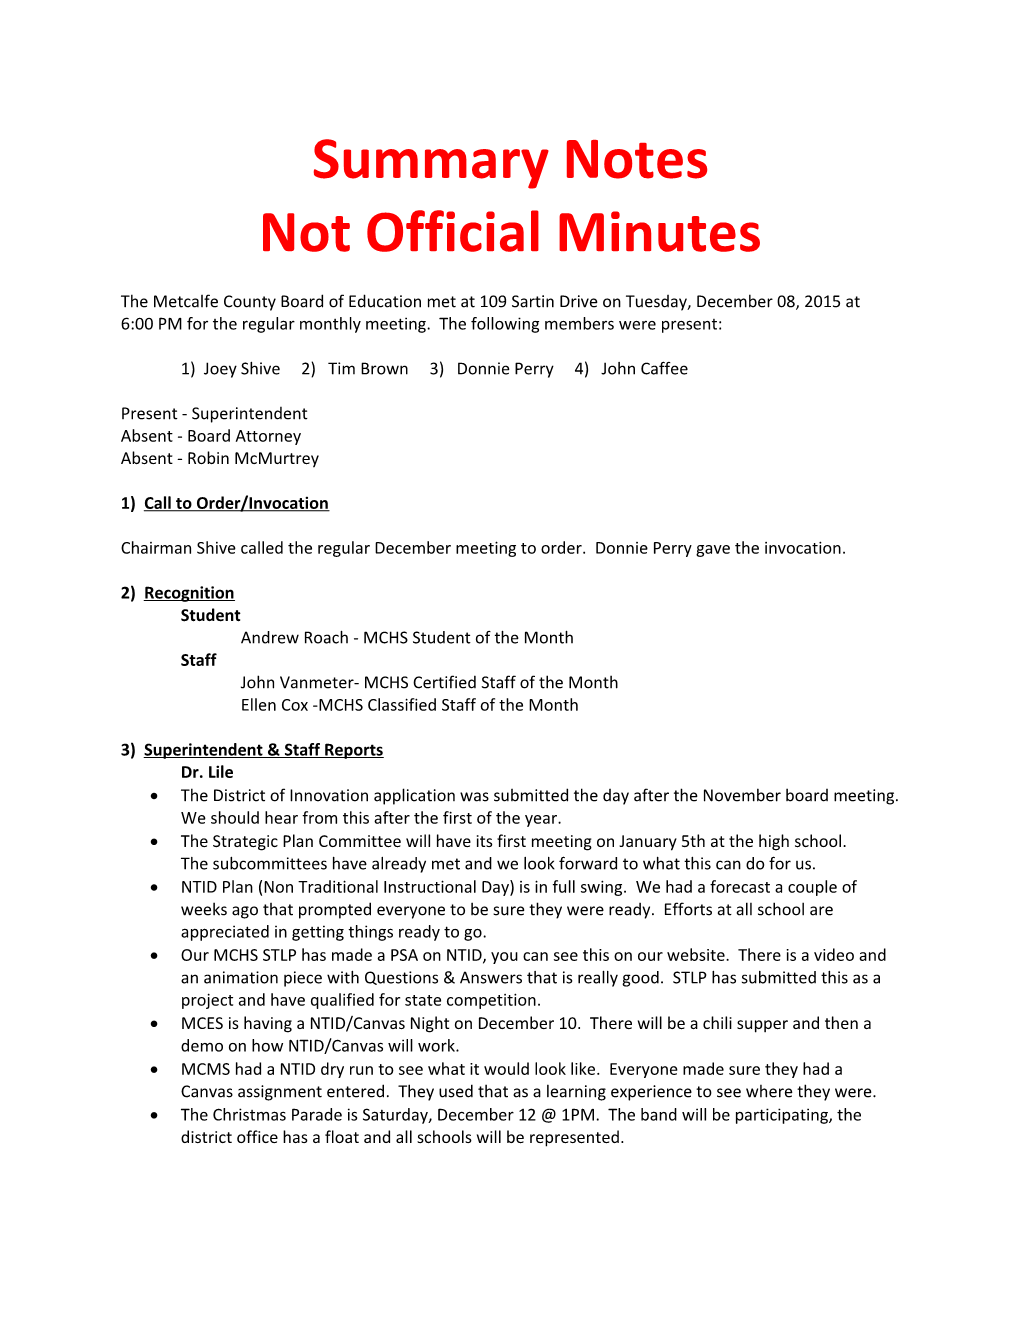 Not Official Minutes